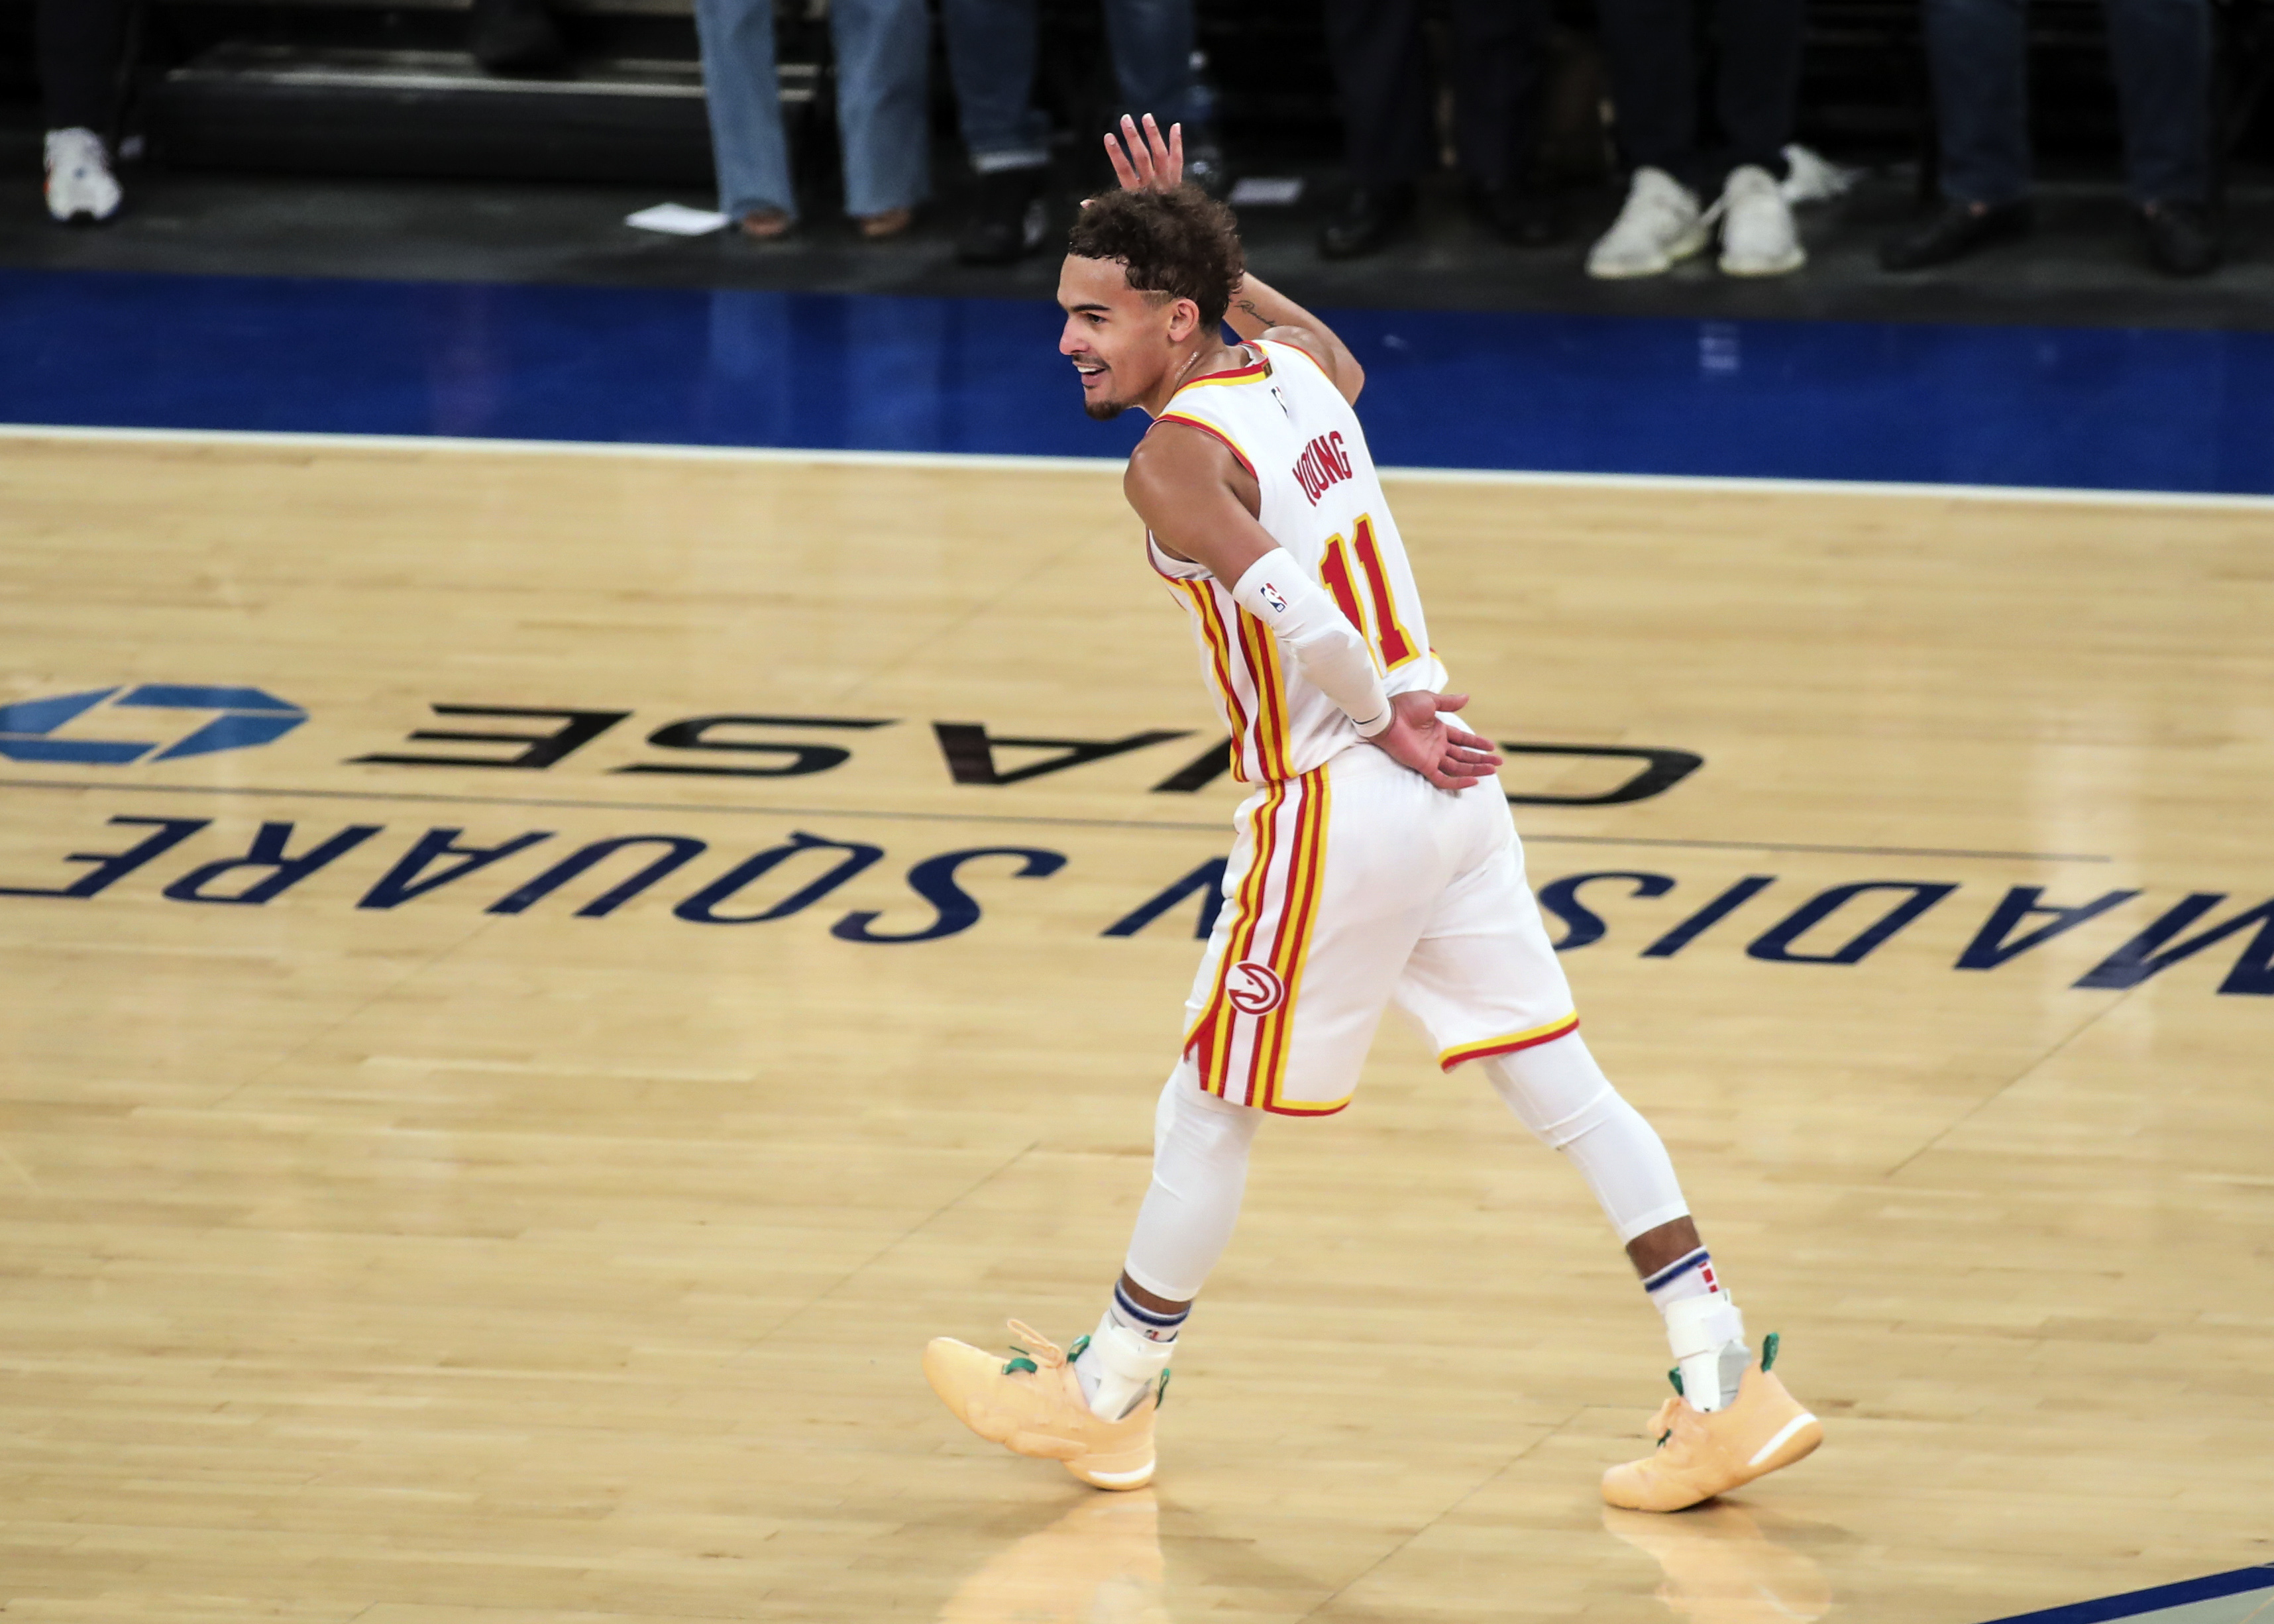 Hawks guard Trae Young ready to prove himself right